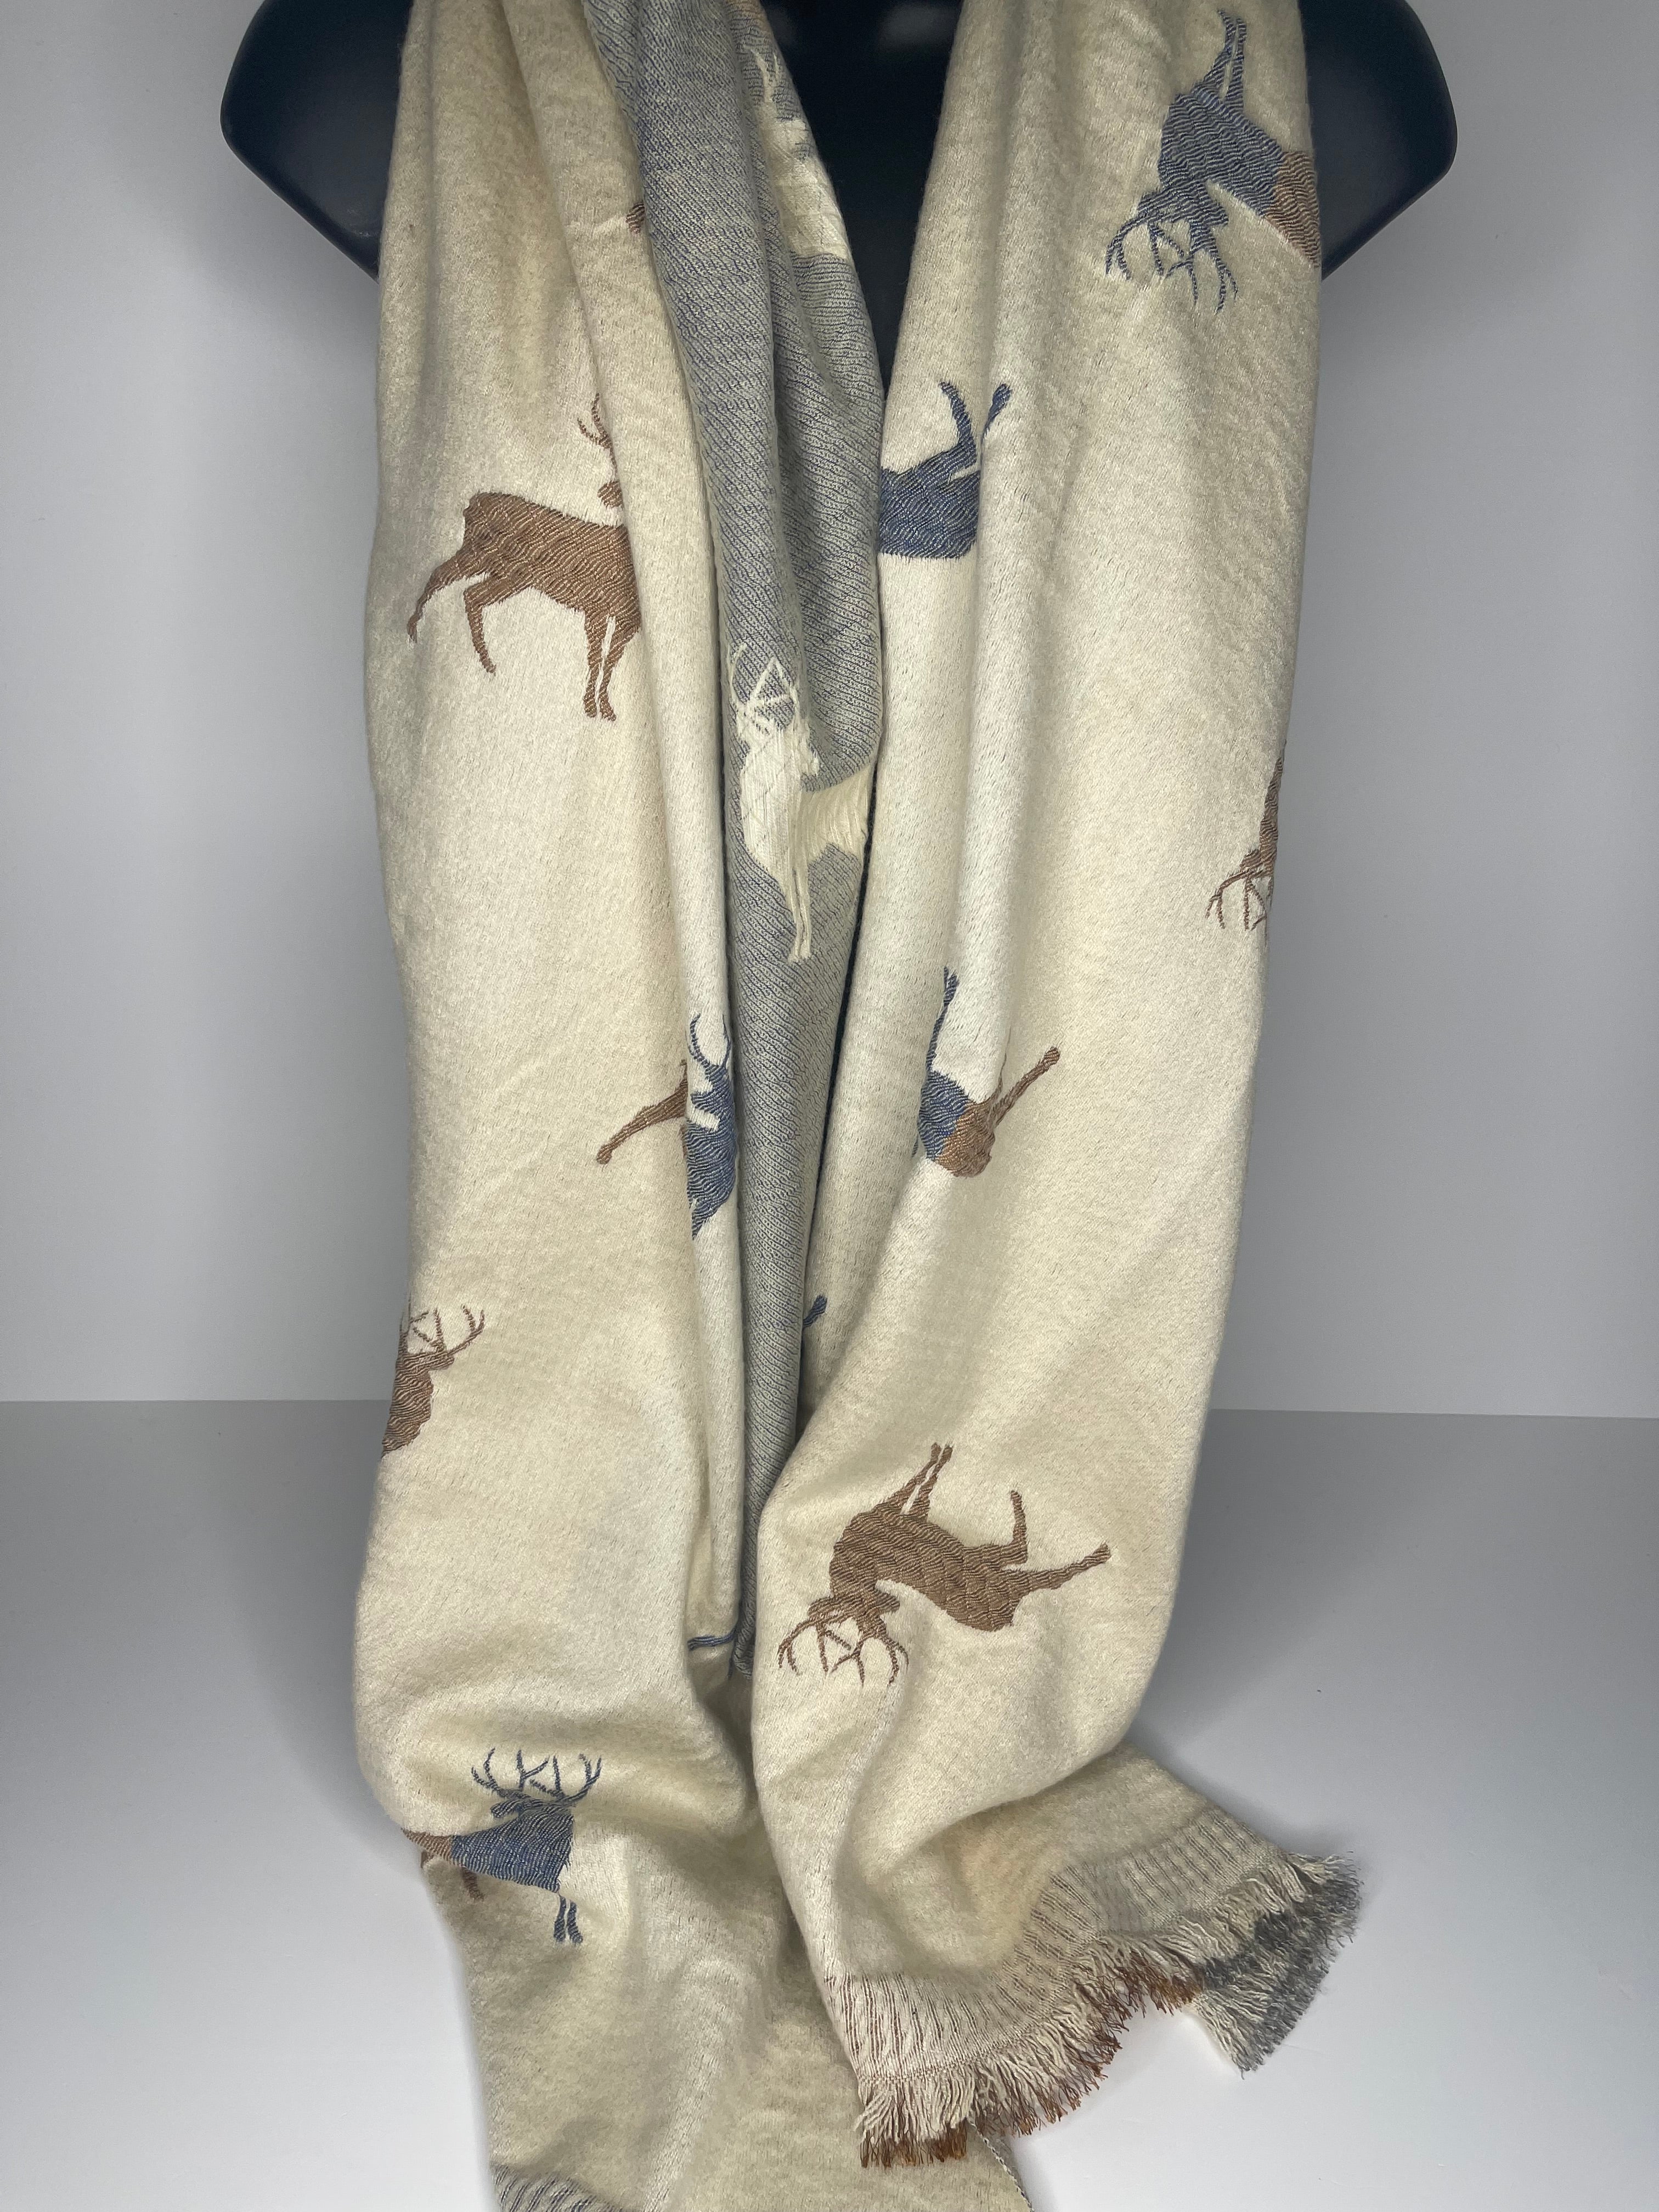 Winter weight, wool-mix, embossed deer print scarf in shades of winter white, grey and caramel